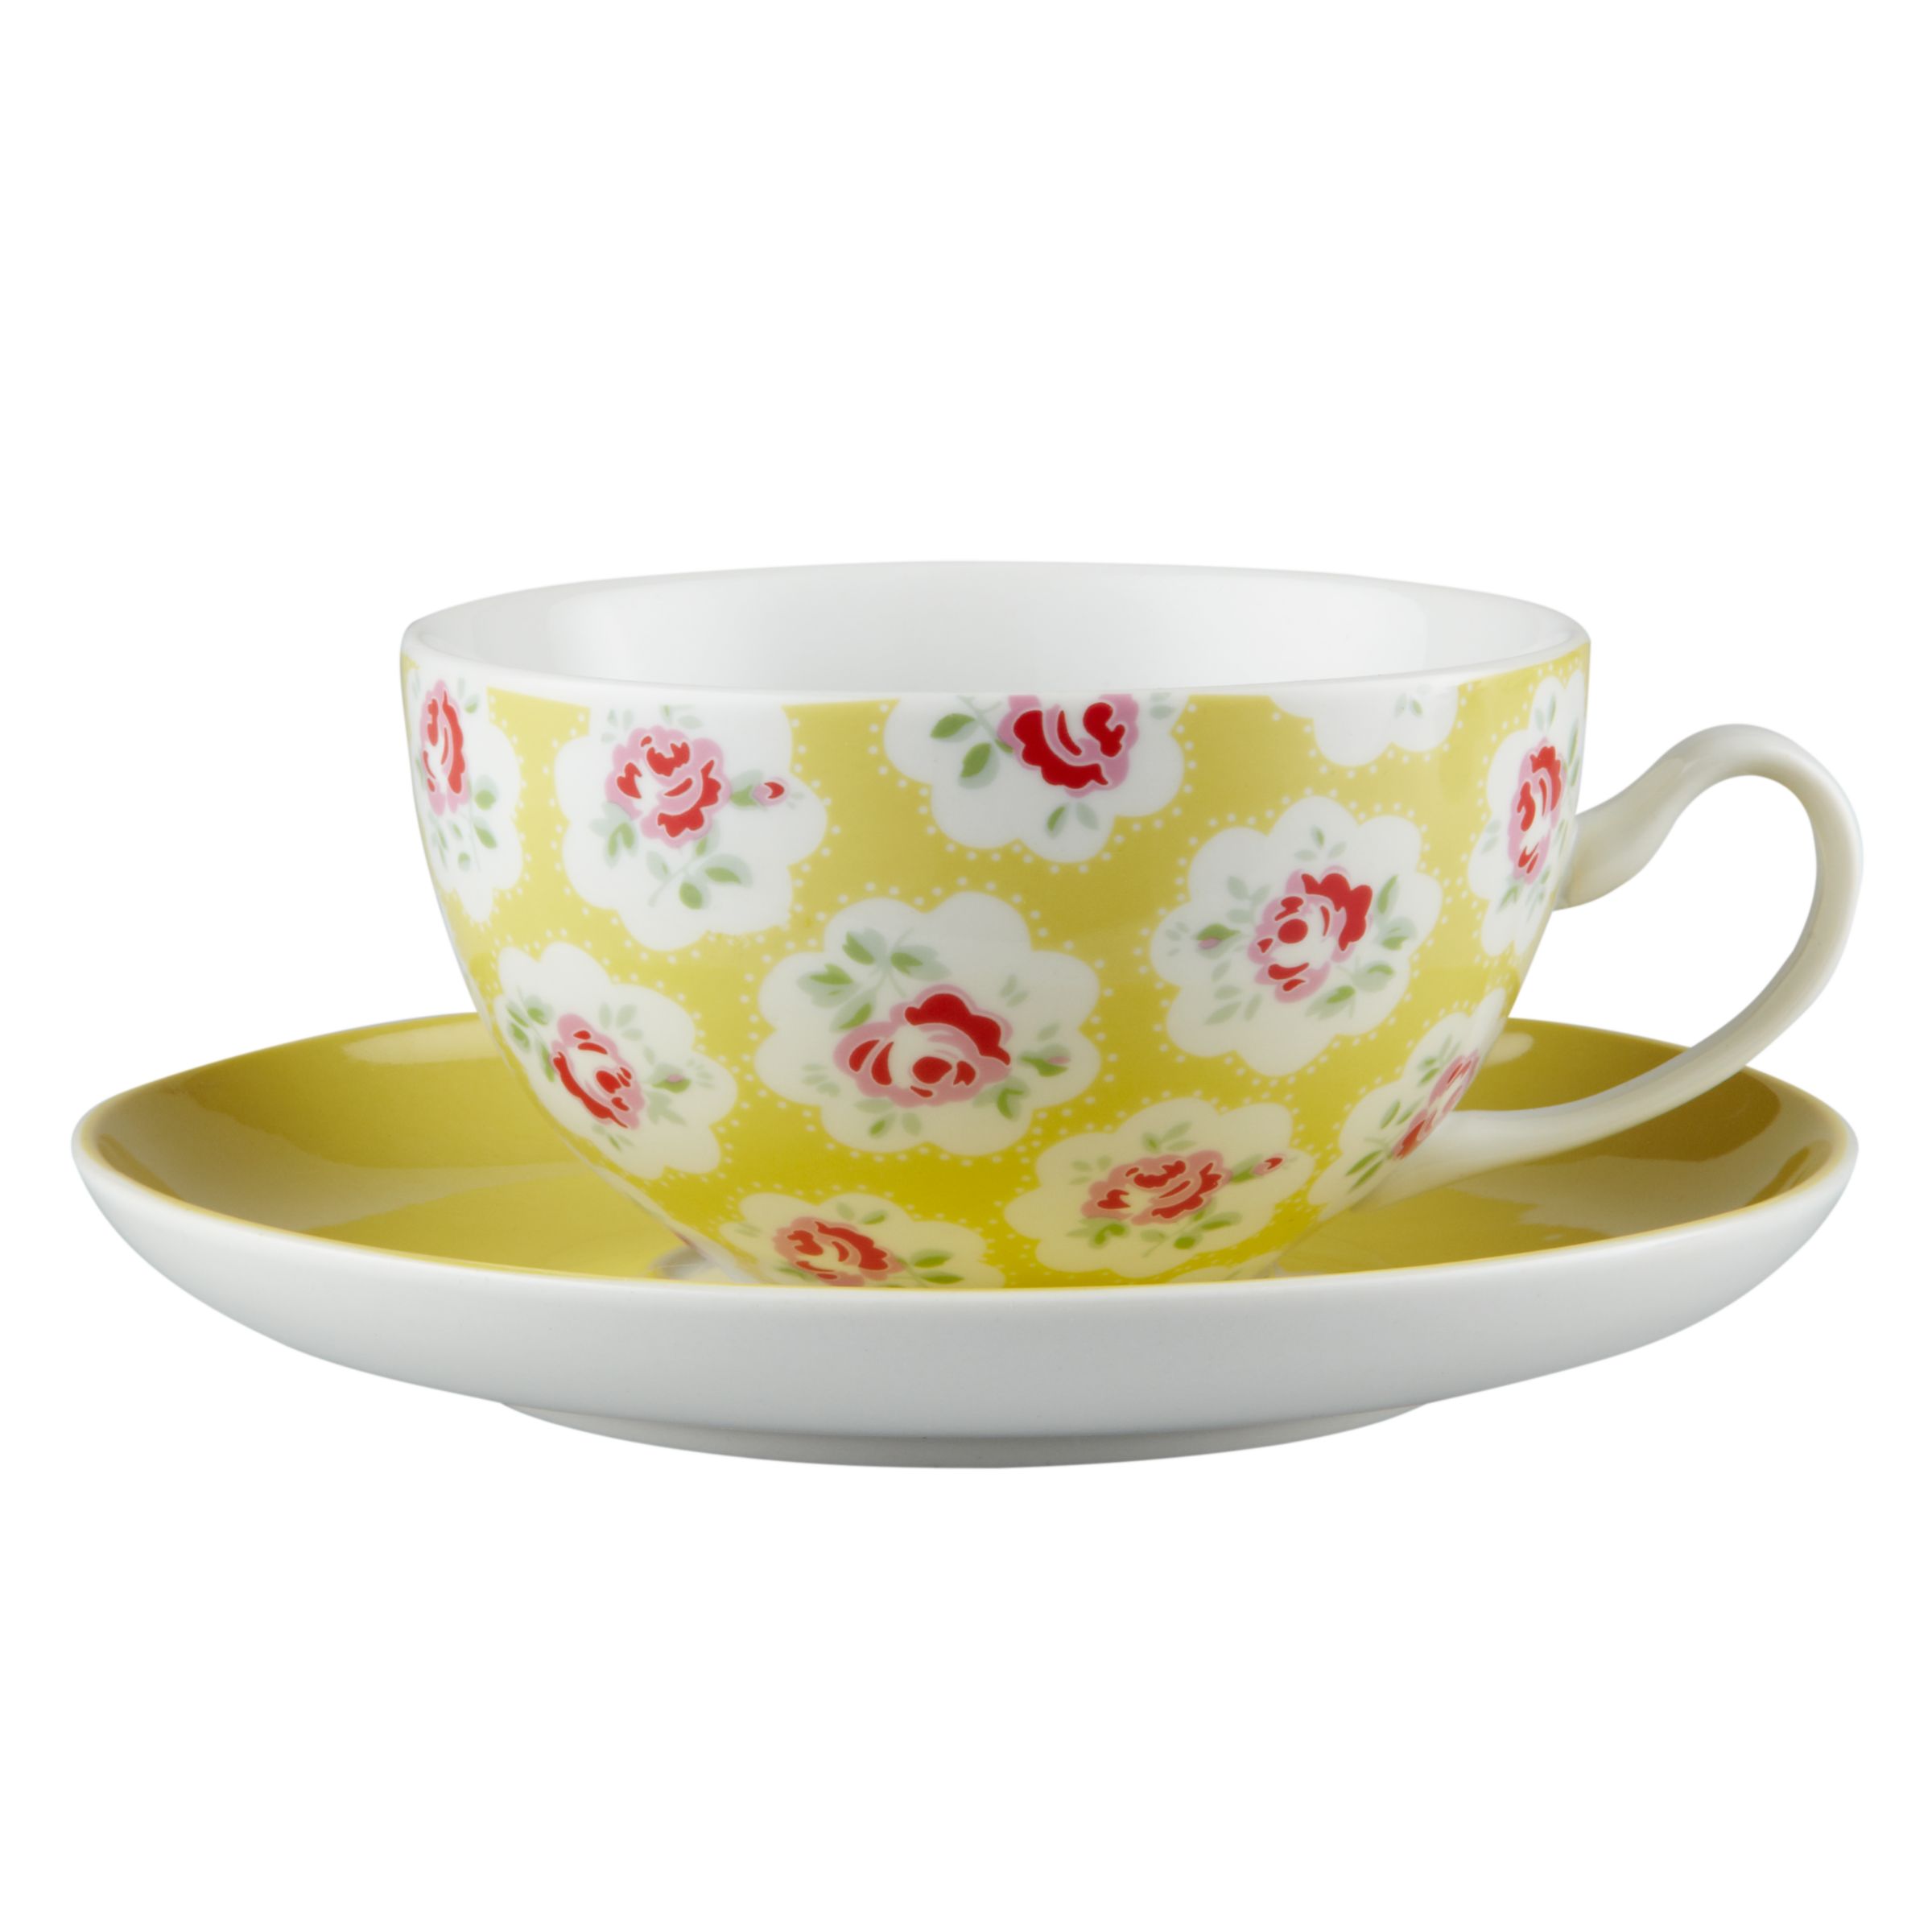 Cath Kidston Cups and Saucers, Provence Rose, Set of 4, 0.2L, Multi